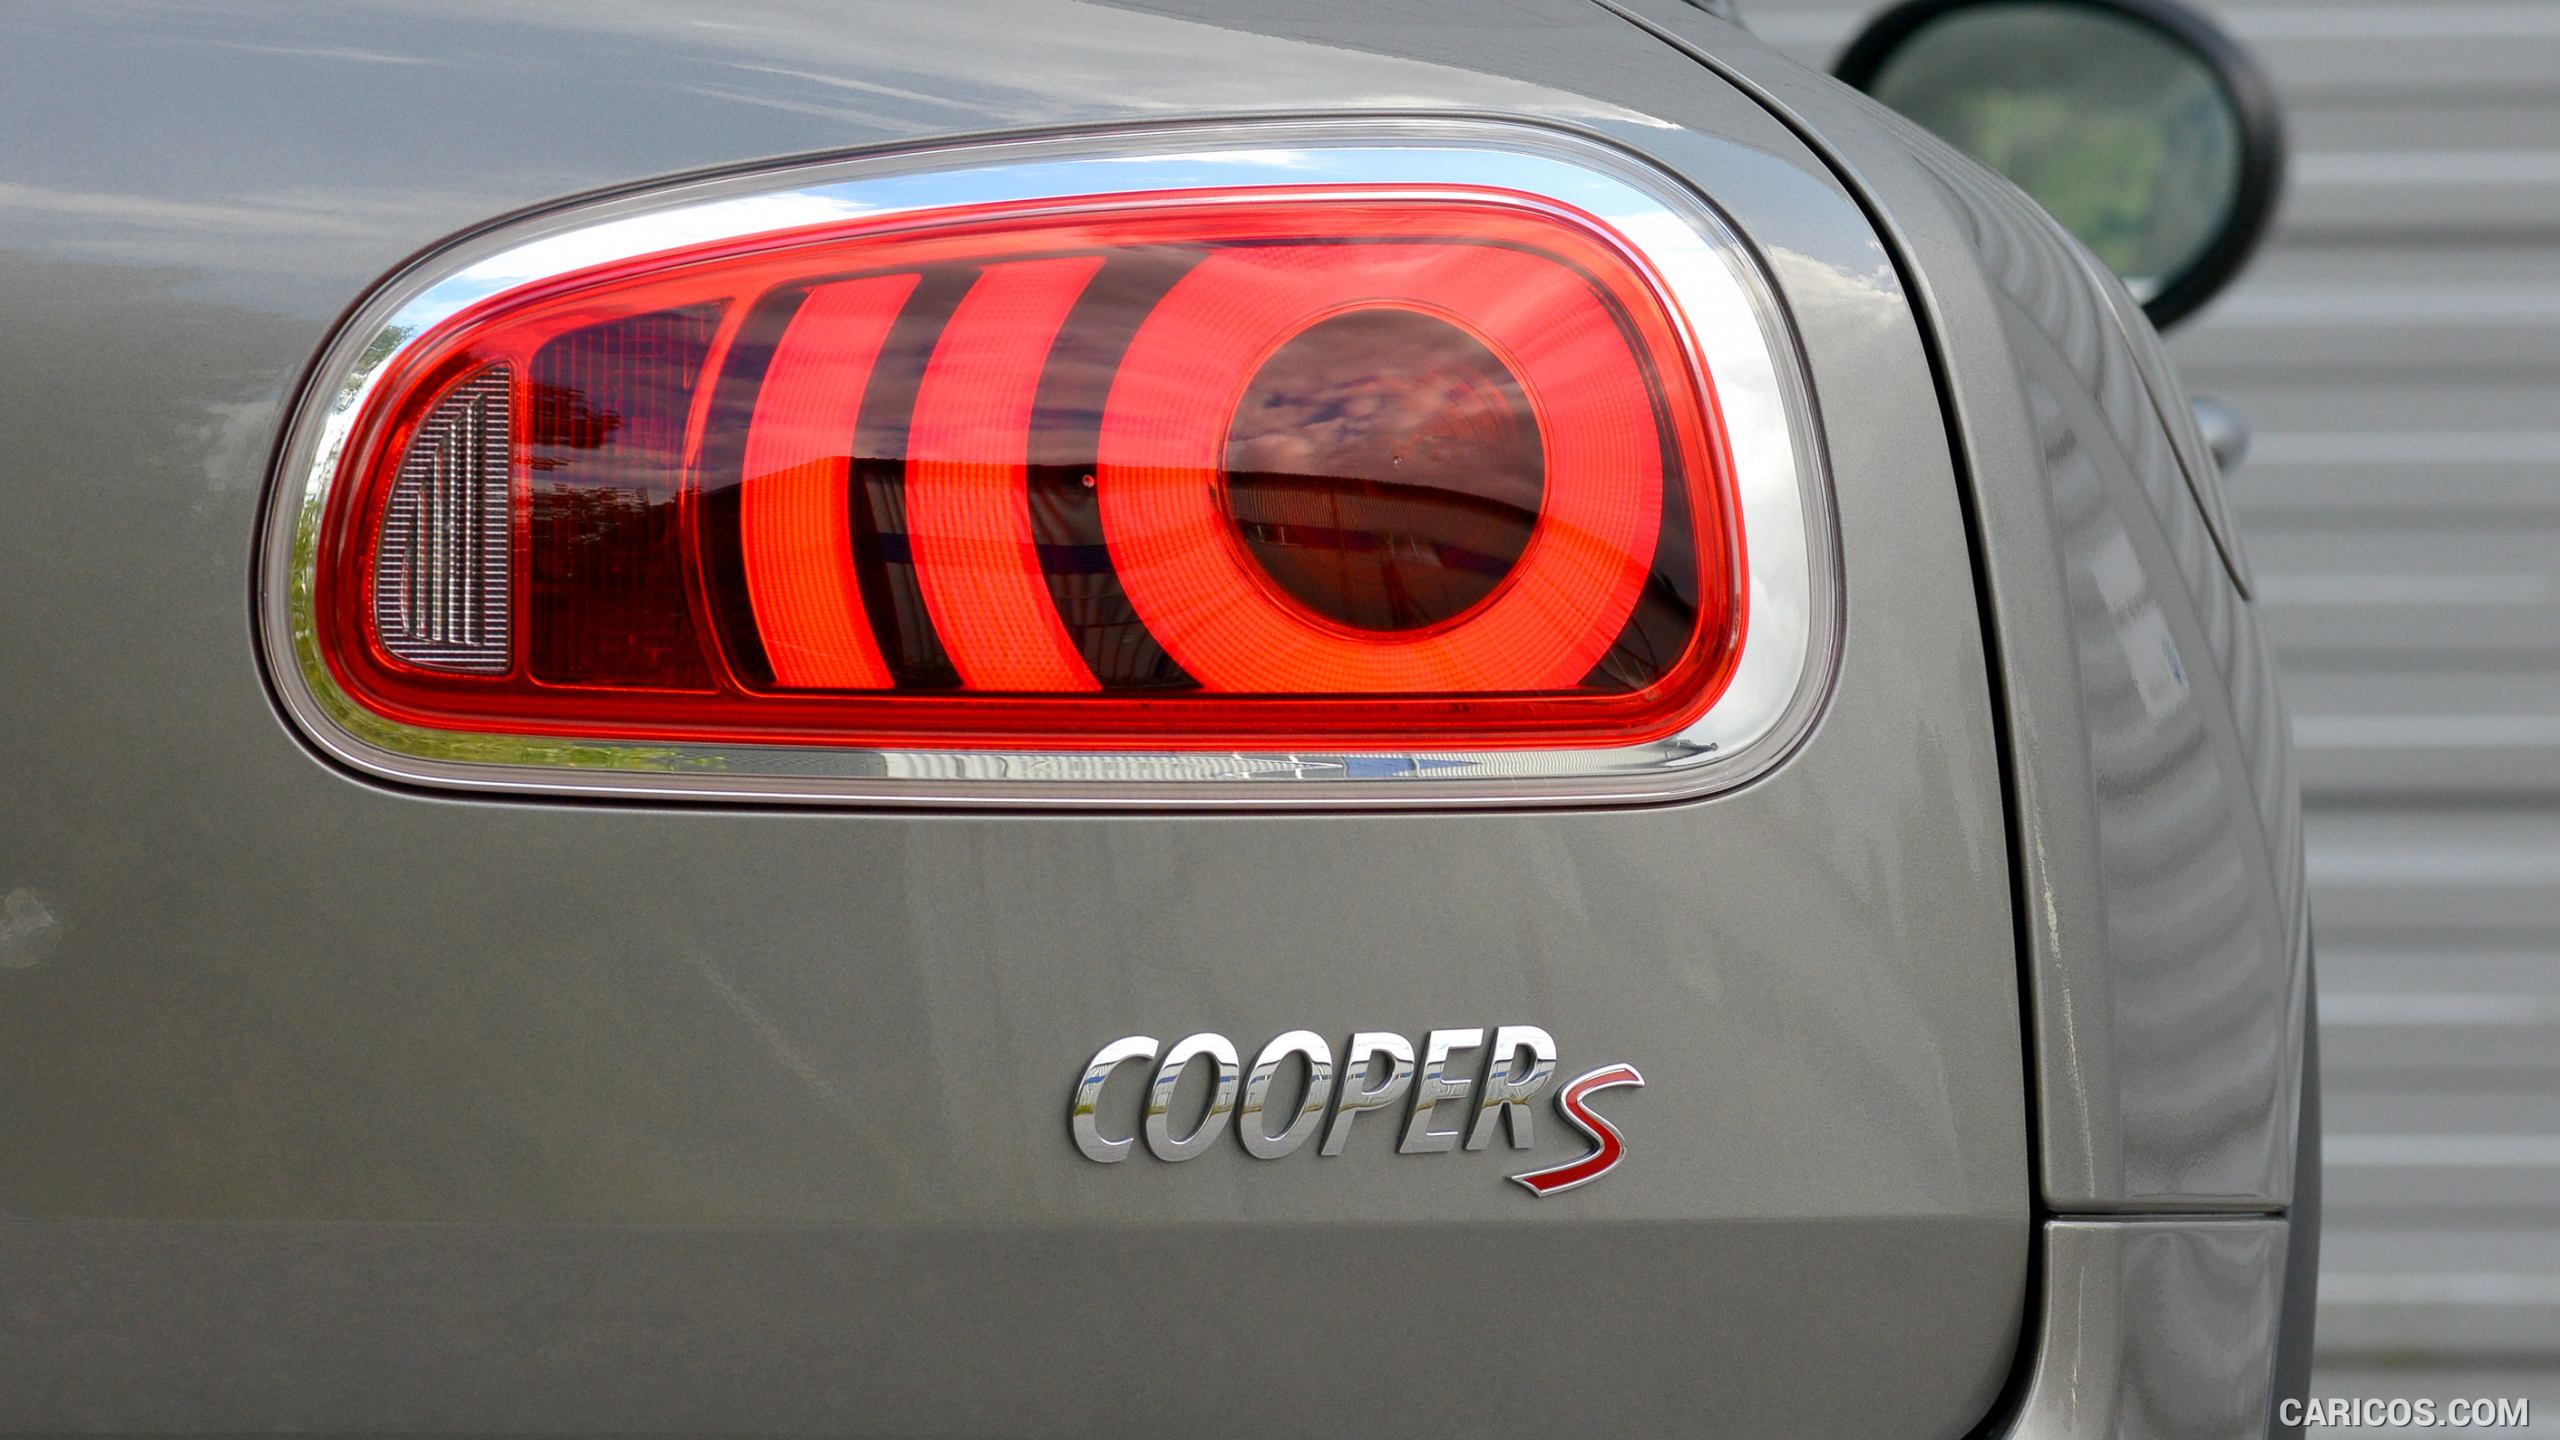 2016 MINI Cooper S Clubman in Metallic Melting Silver - Tail Light, #212 of 380